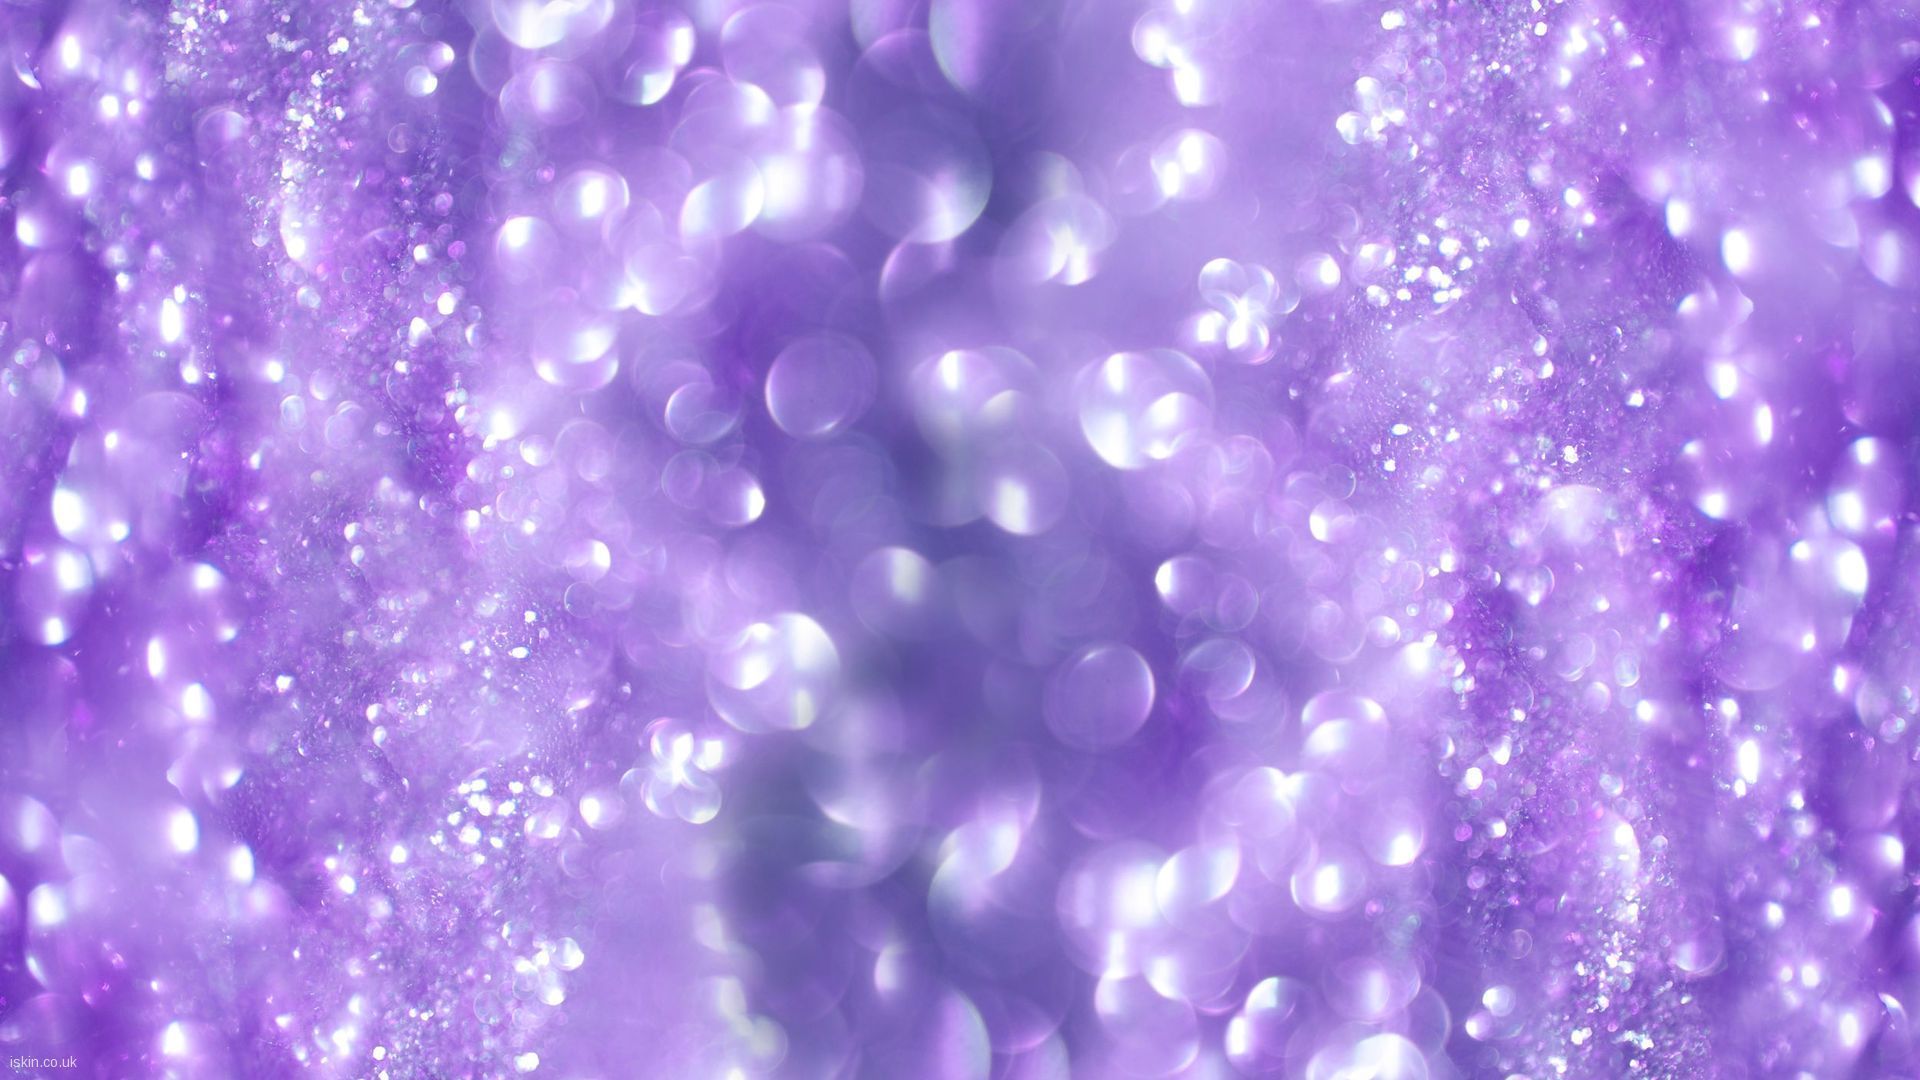 1920x1080 Purple Bokeh Backgrounds | The Art Mad Wallpapers - Glitter